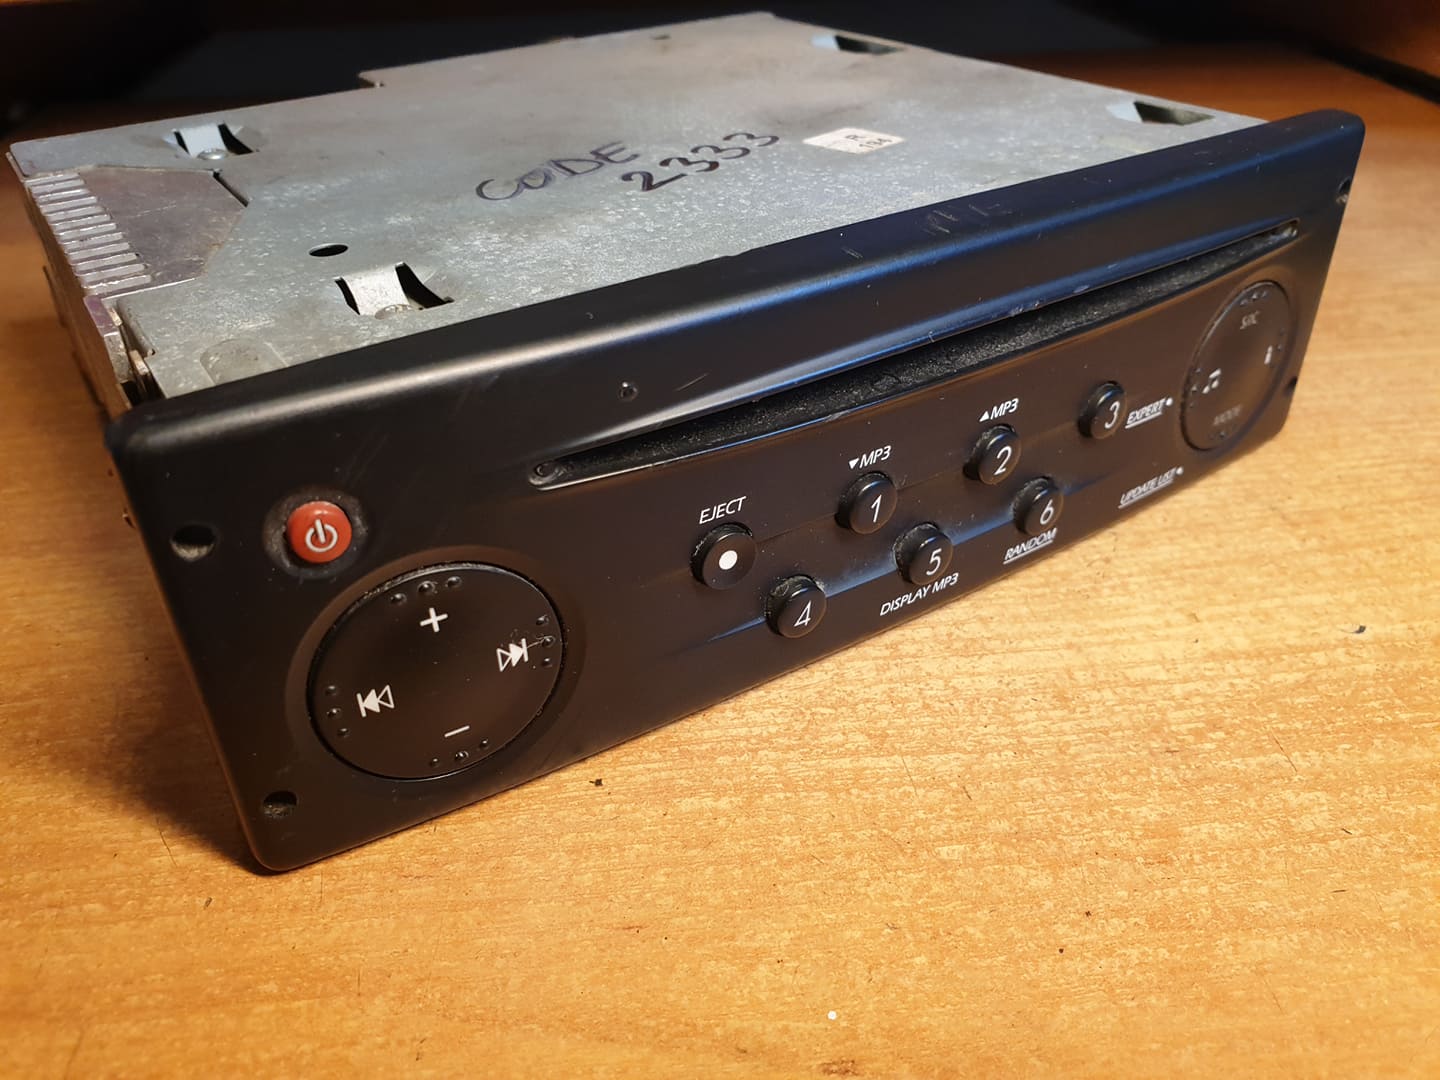 2010 RENAULT TRAFIC RADIO CD PLAYER 8200585305 WITH CODE